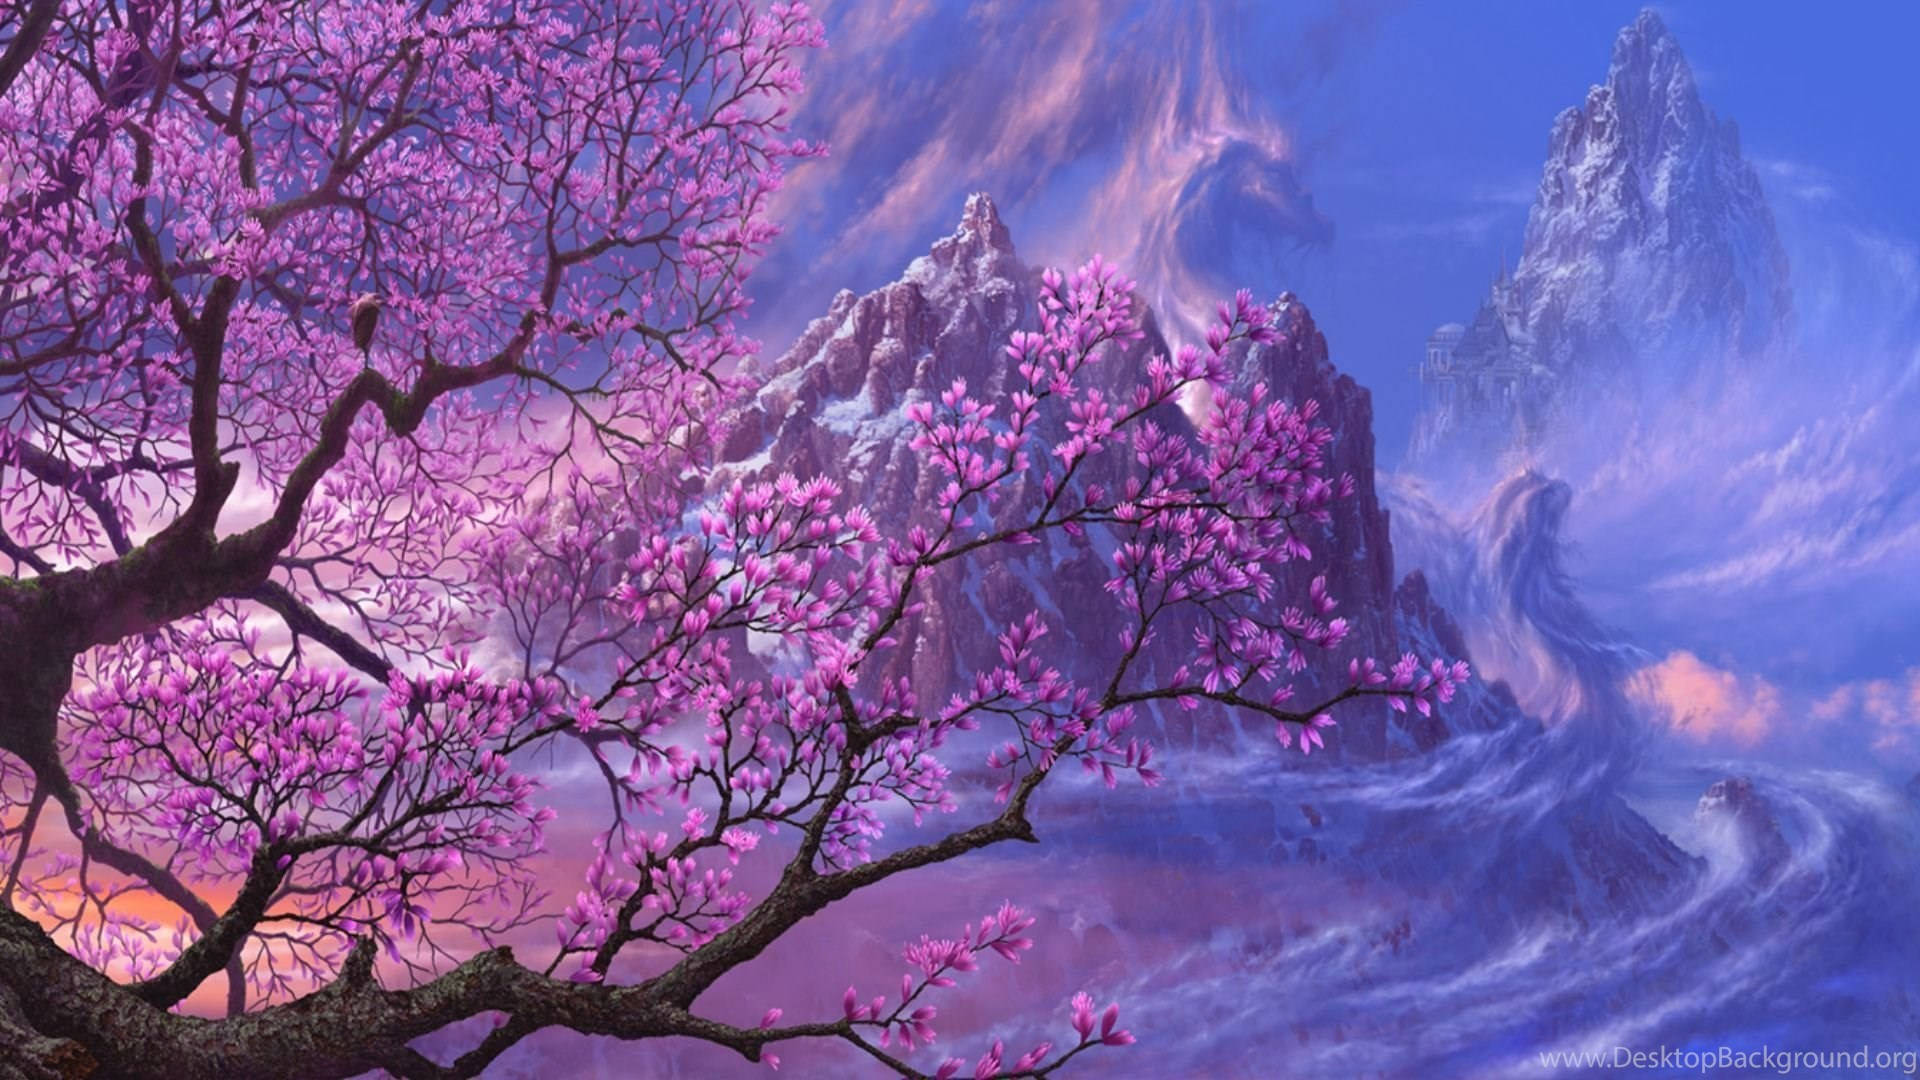 Immerse In The Alluring Beauty Of Japan's Iconic Sakura, Or Cherry Blossom Flower. Wallpaper